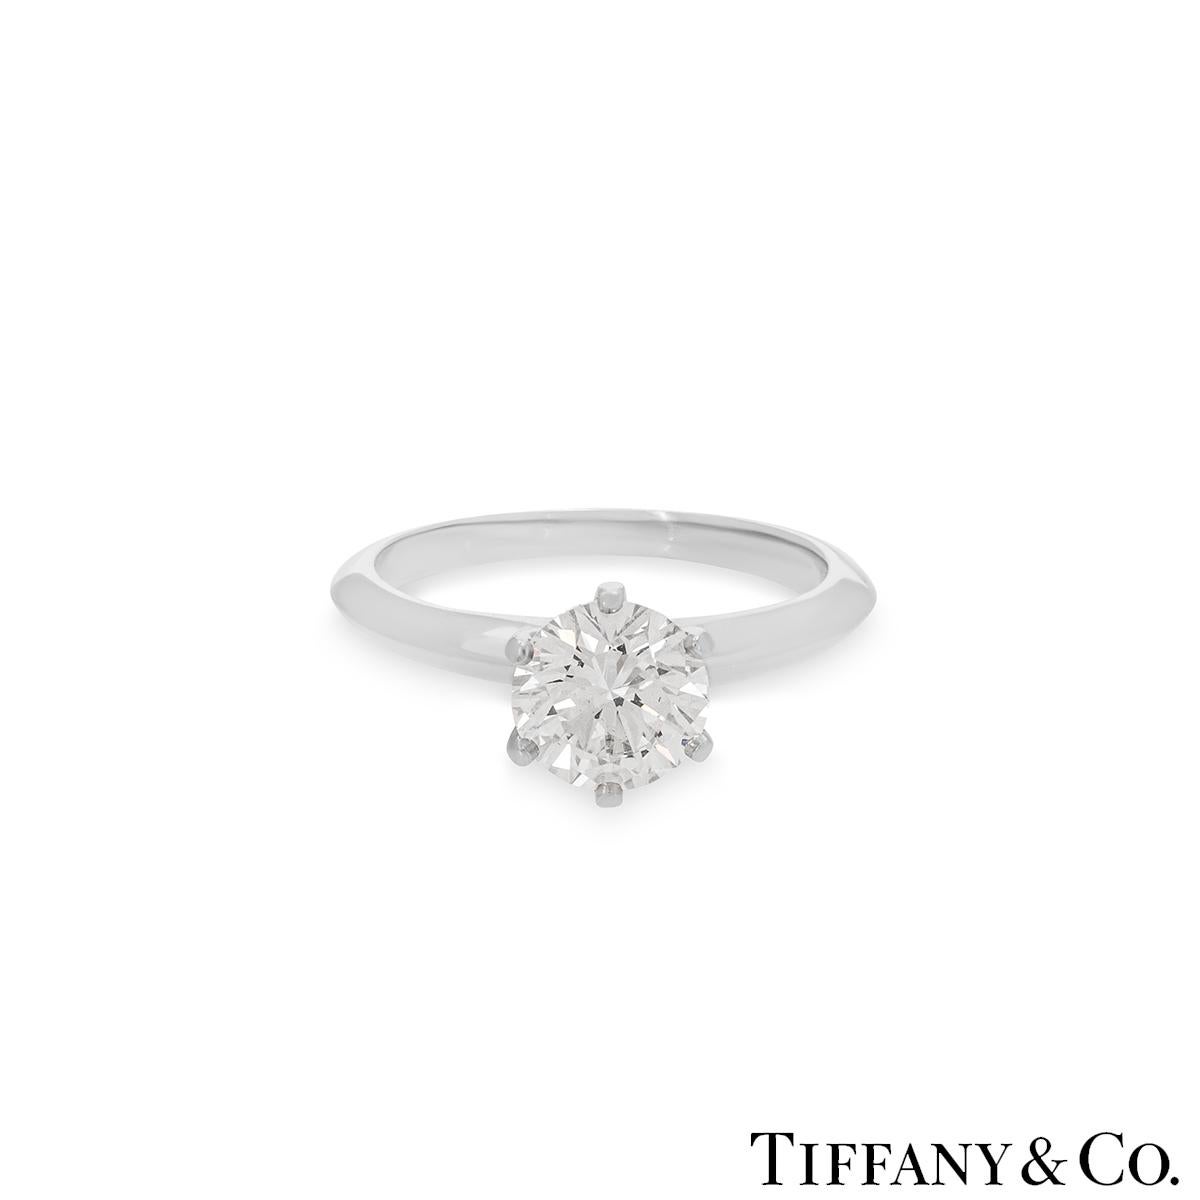 Round Cut GIA Certified Tiffany & Co. Platinum Diamond Setting Ring 1.09ct D/IF For Sale